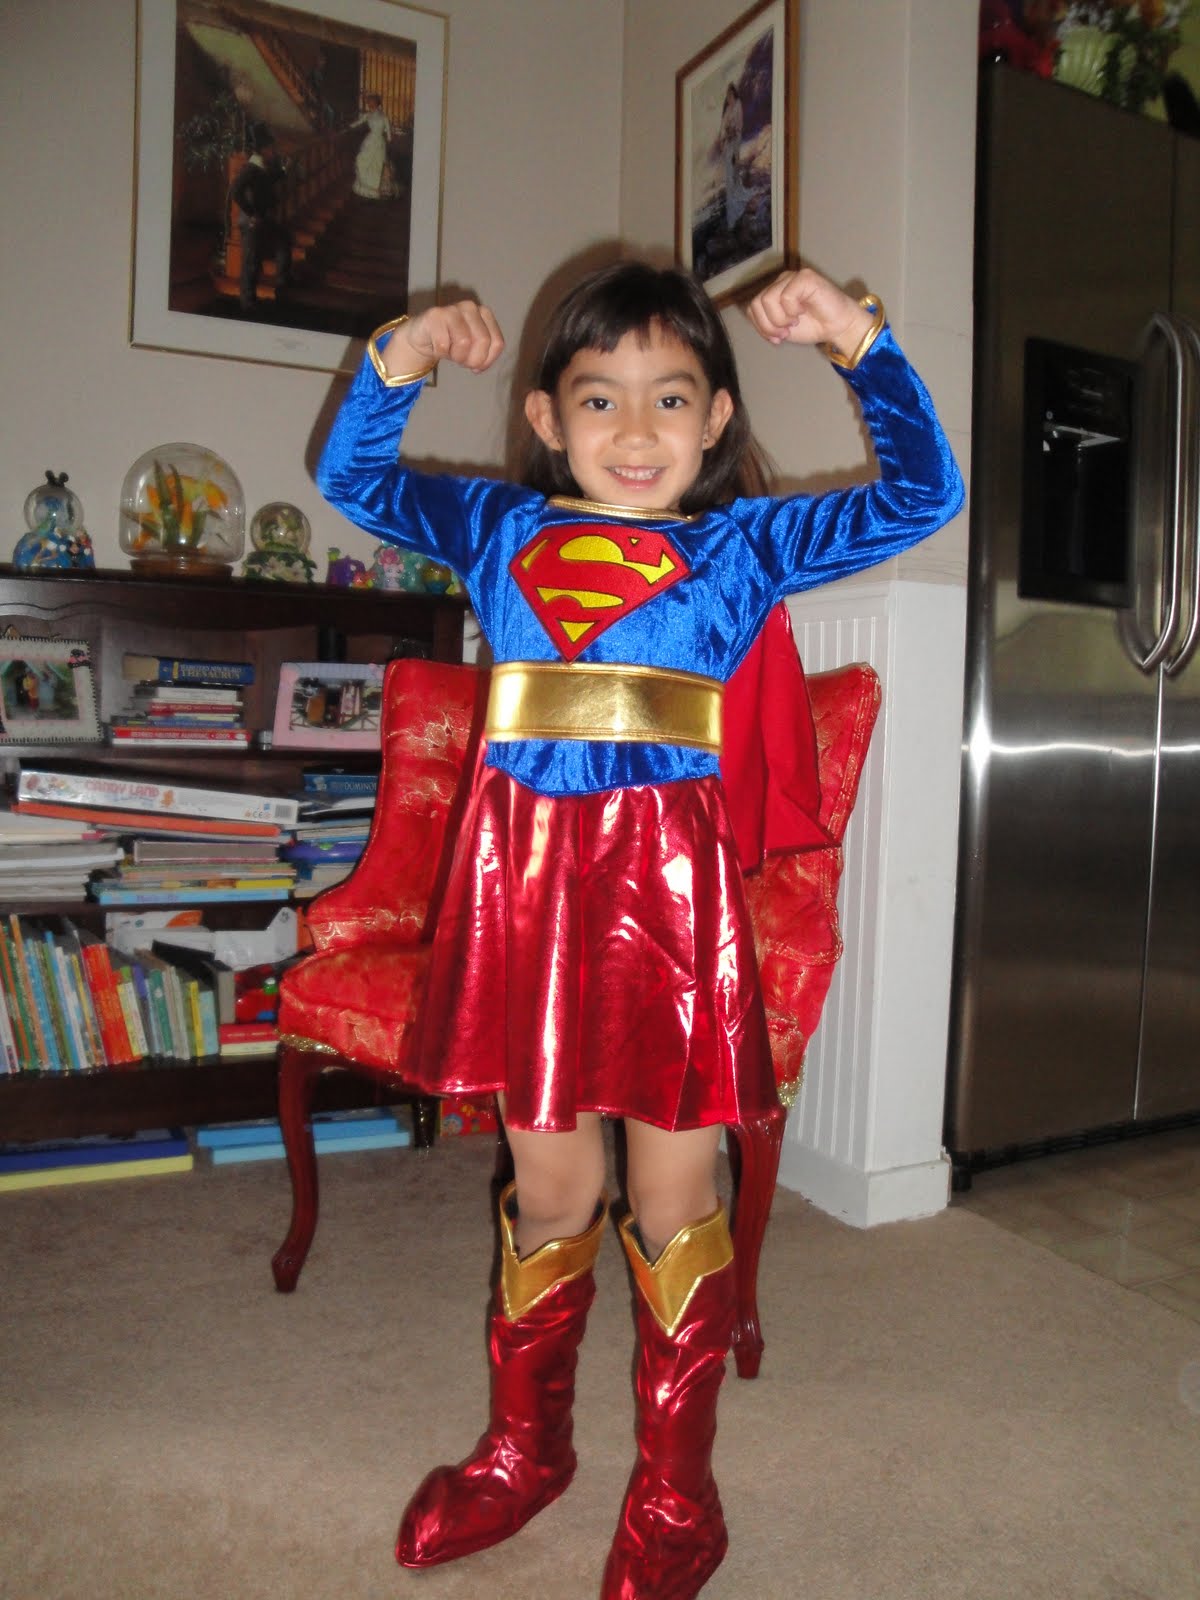 Travels and Wandering: Supergirl Costume